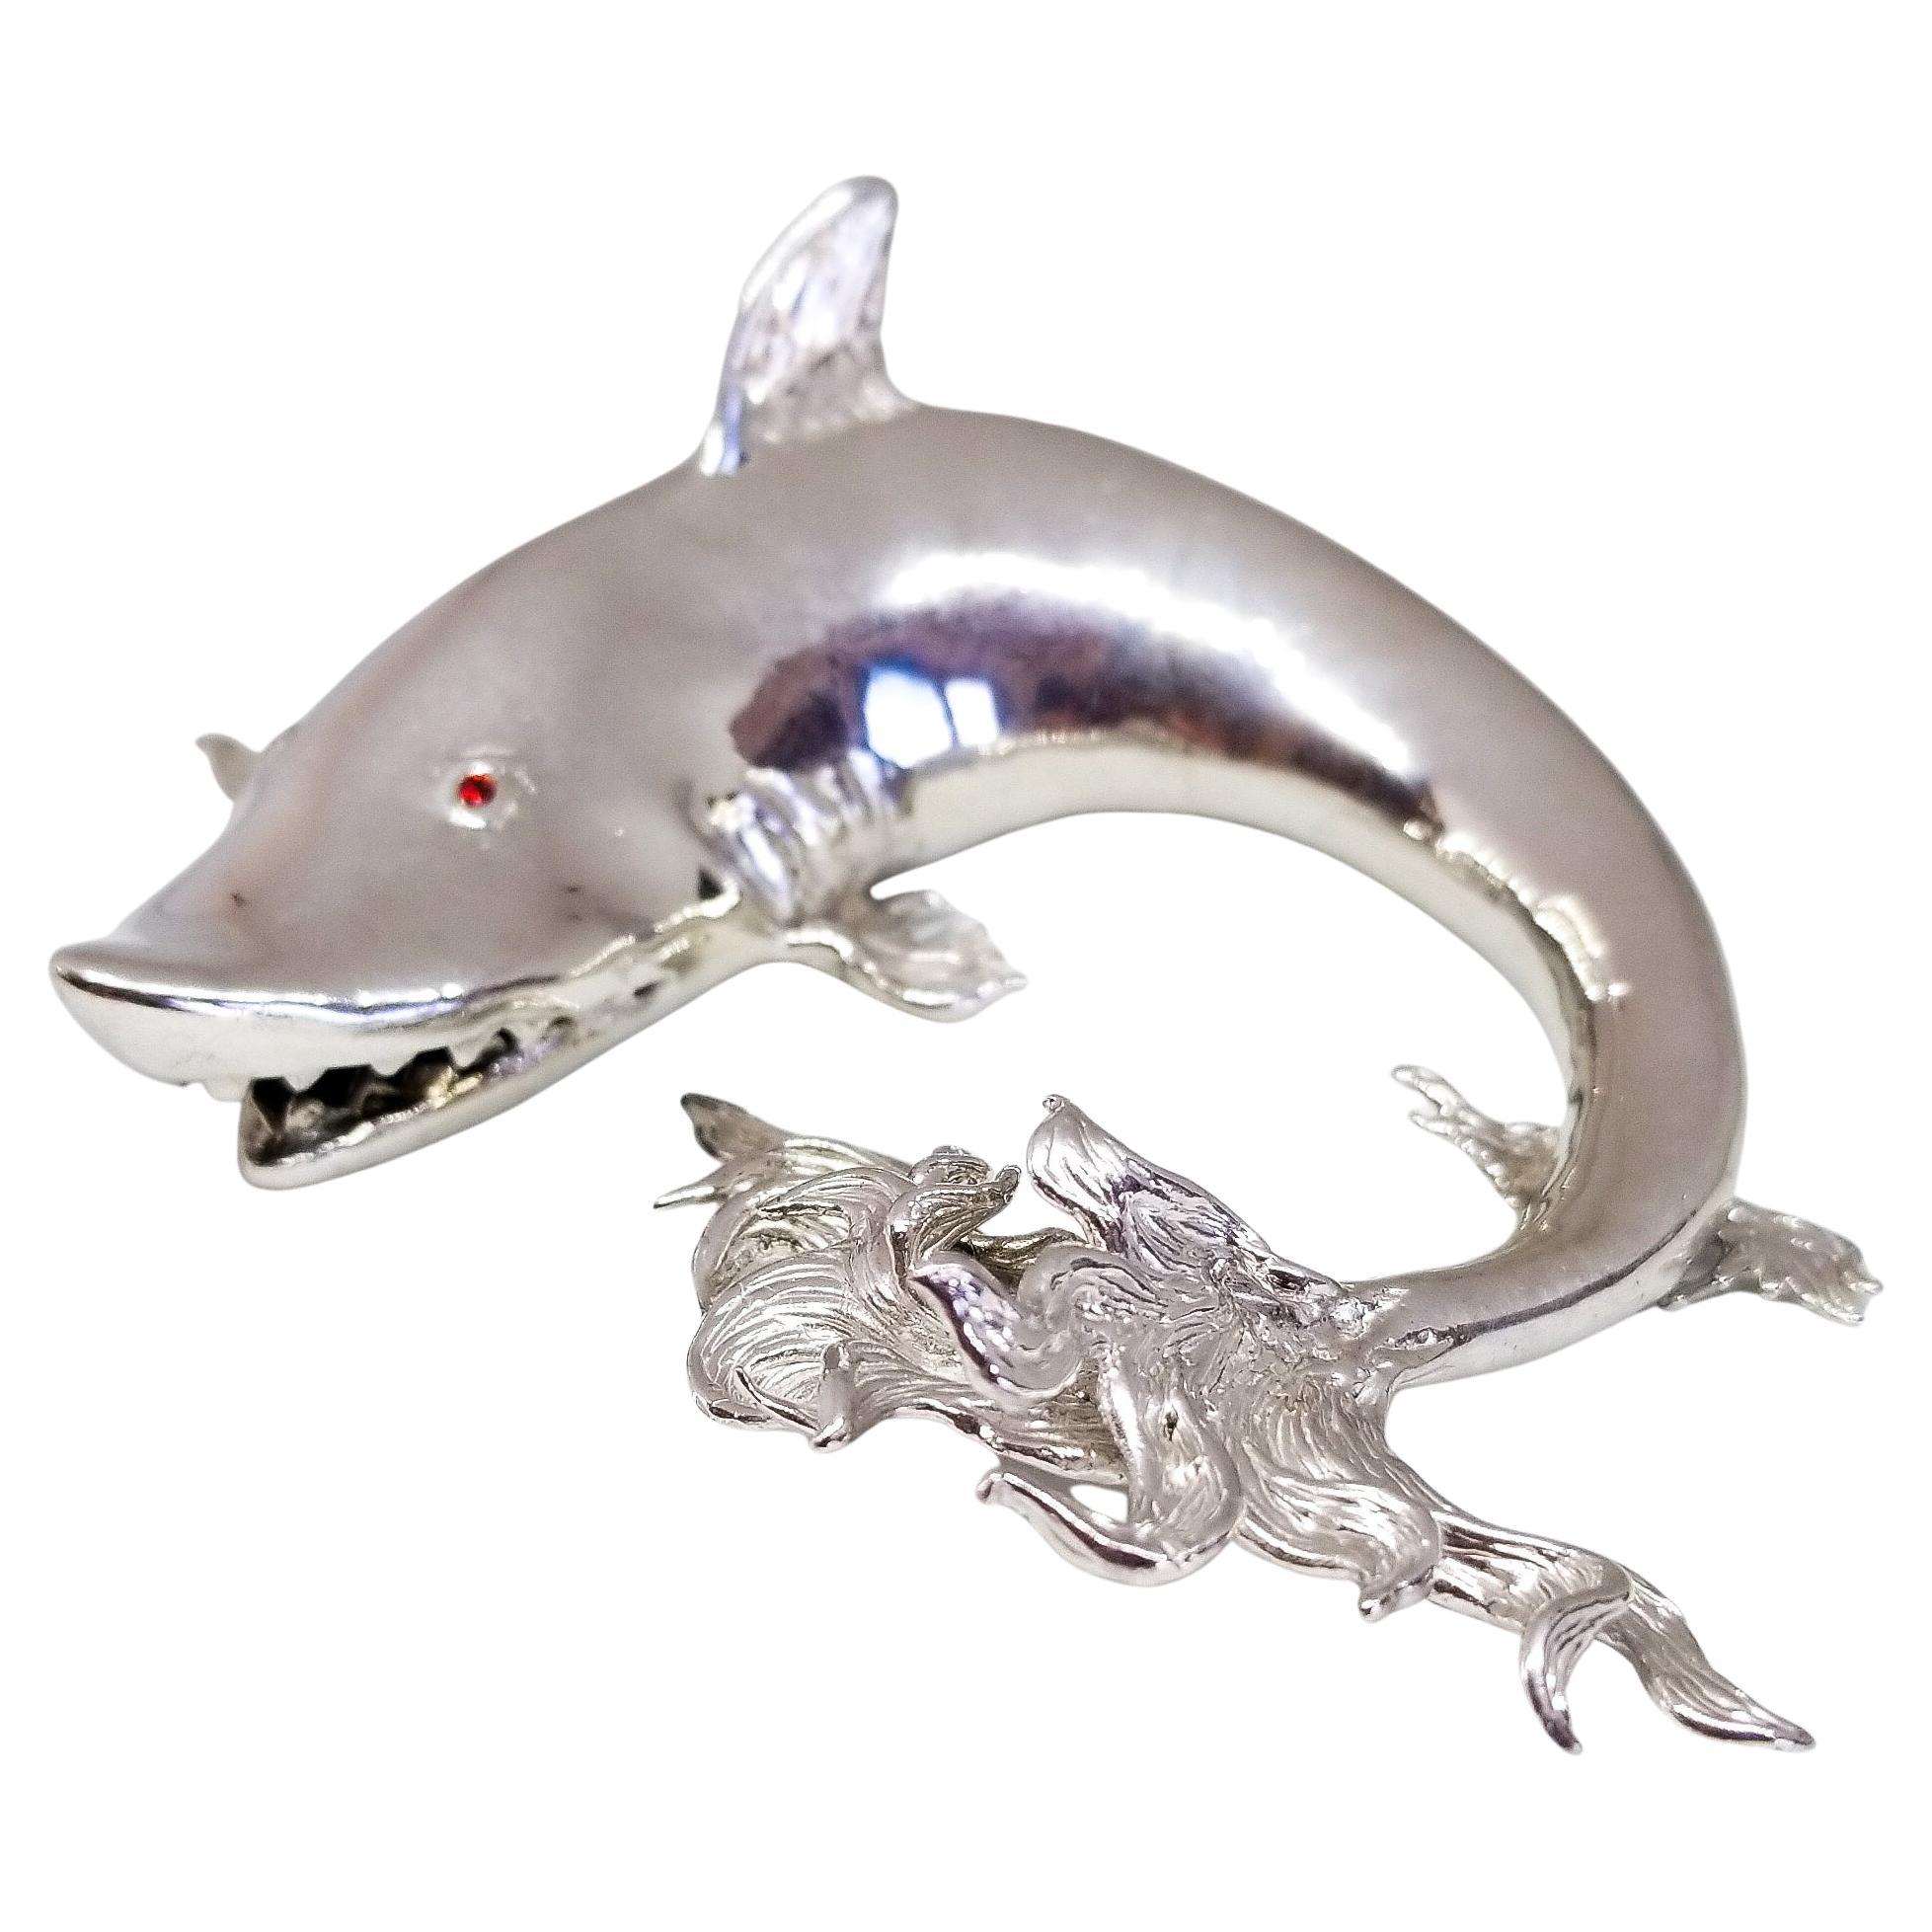 Unique.
One of a Kind Collection Piece.
Jewel Eyed Shark Figurine in Sterling Silver.
This palm sized Desk and Curio Showpiece is constructed in Highly Polished Solid Sterling Silver. Adorning the Whimsical Shark are two Brilliant Cut, Orange